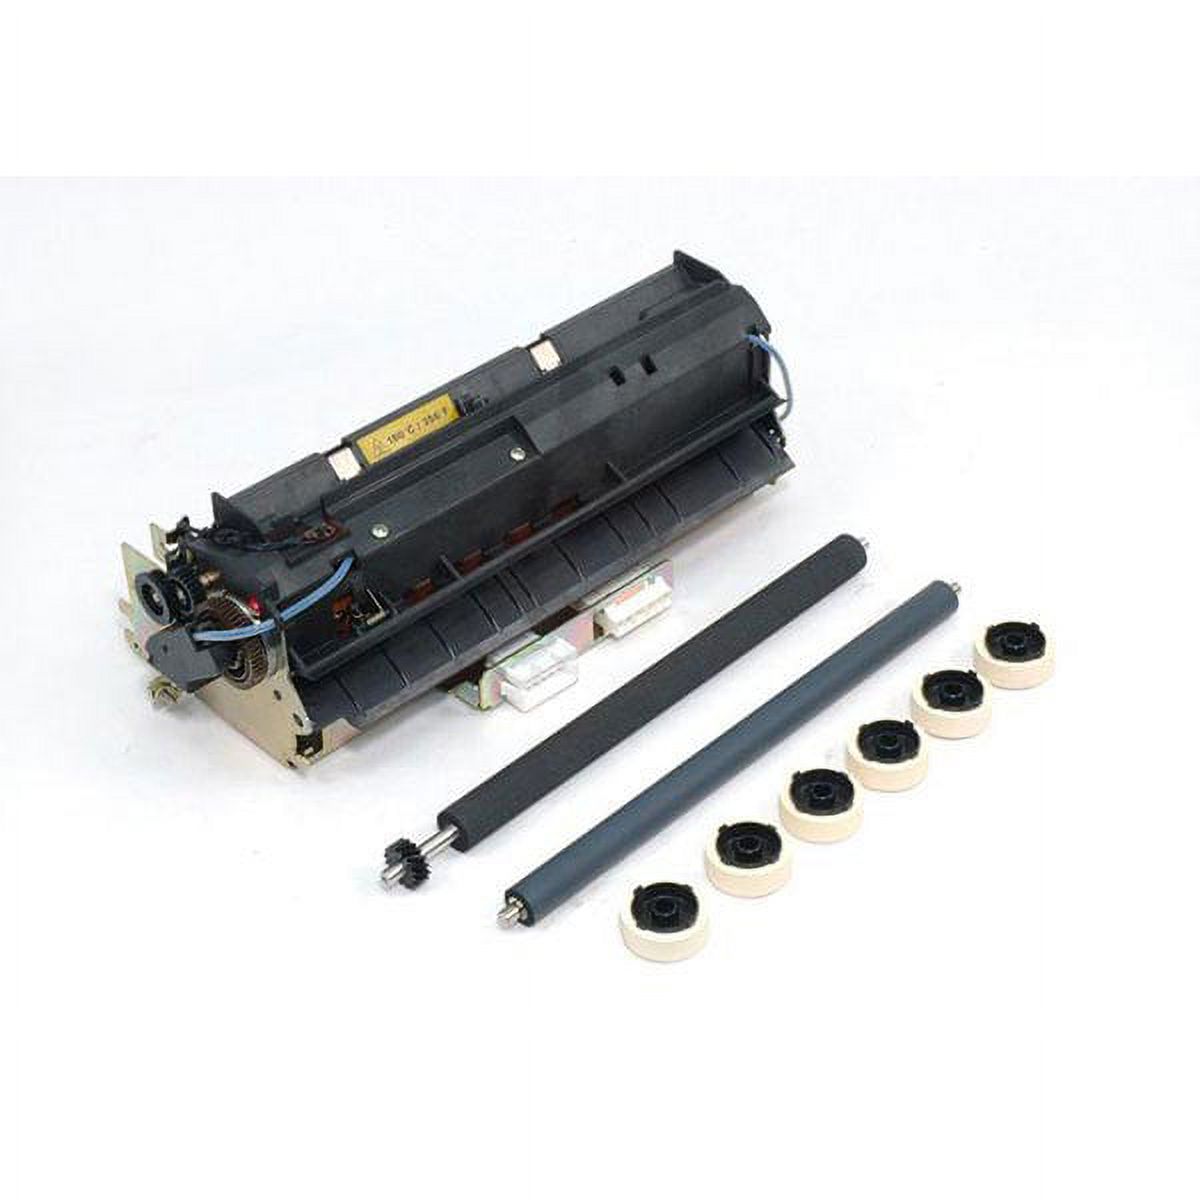 Refurbished Maintenance Kit with OEM Rollers (Includes Fuser Transfer Roller Charge Roller Pick Rollers) (OEM# 99A1978A) (300000 Yield) - image 1 of 2